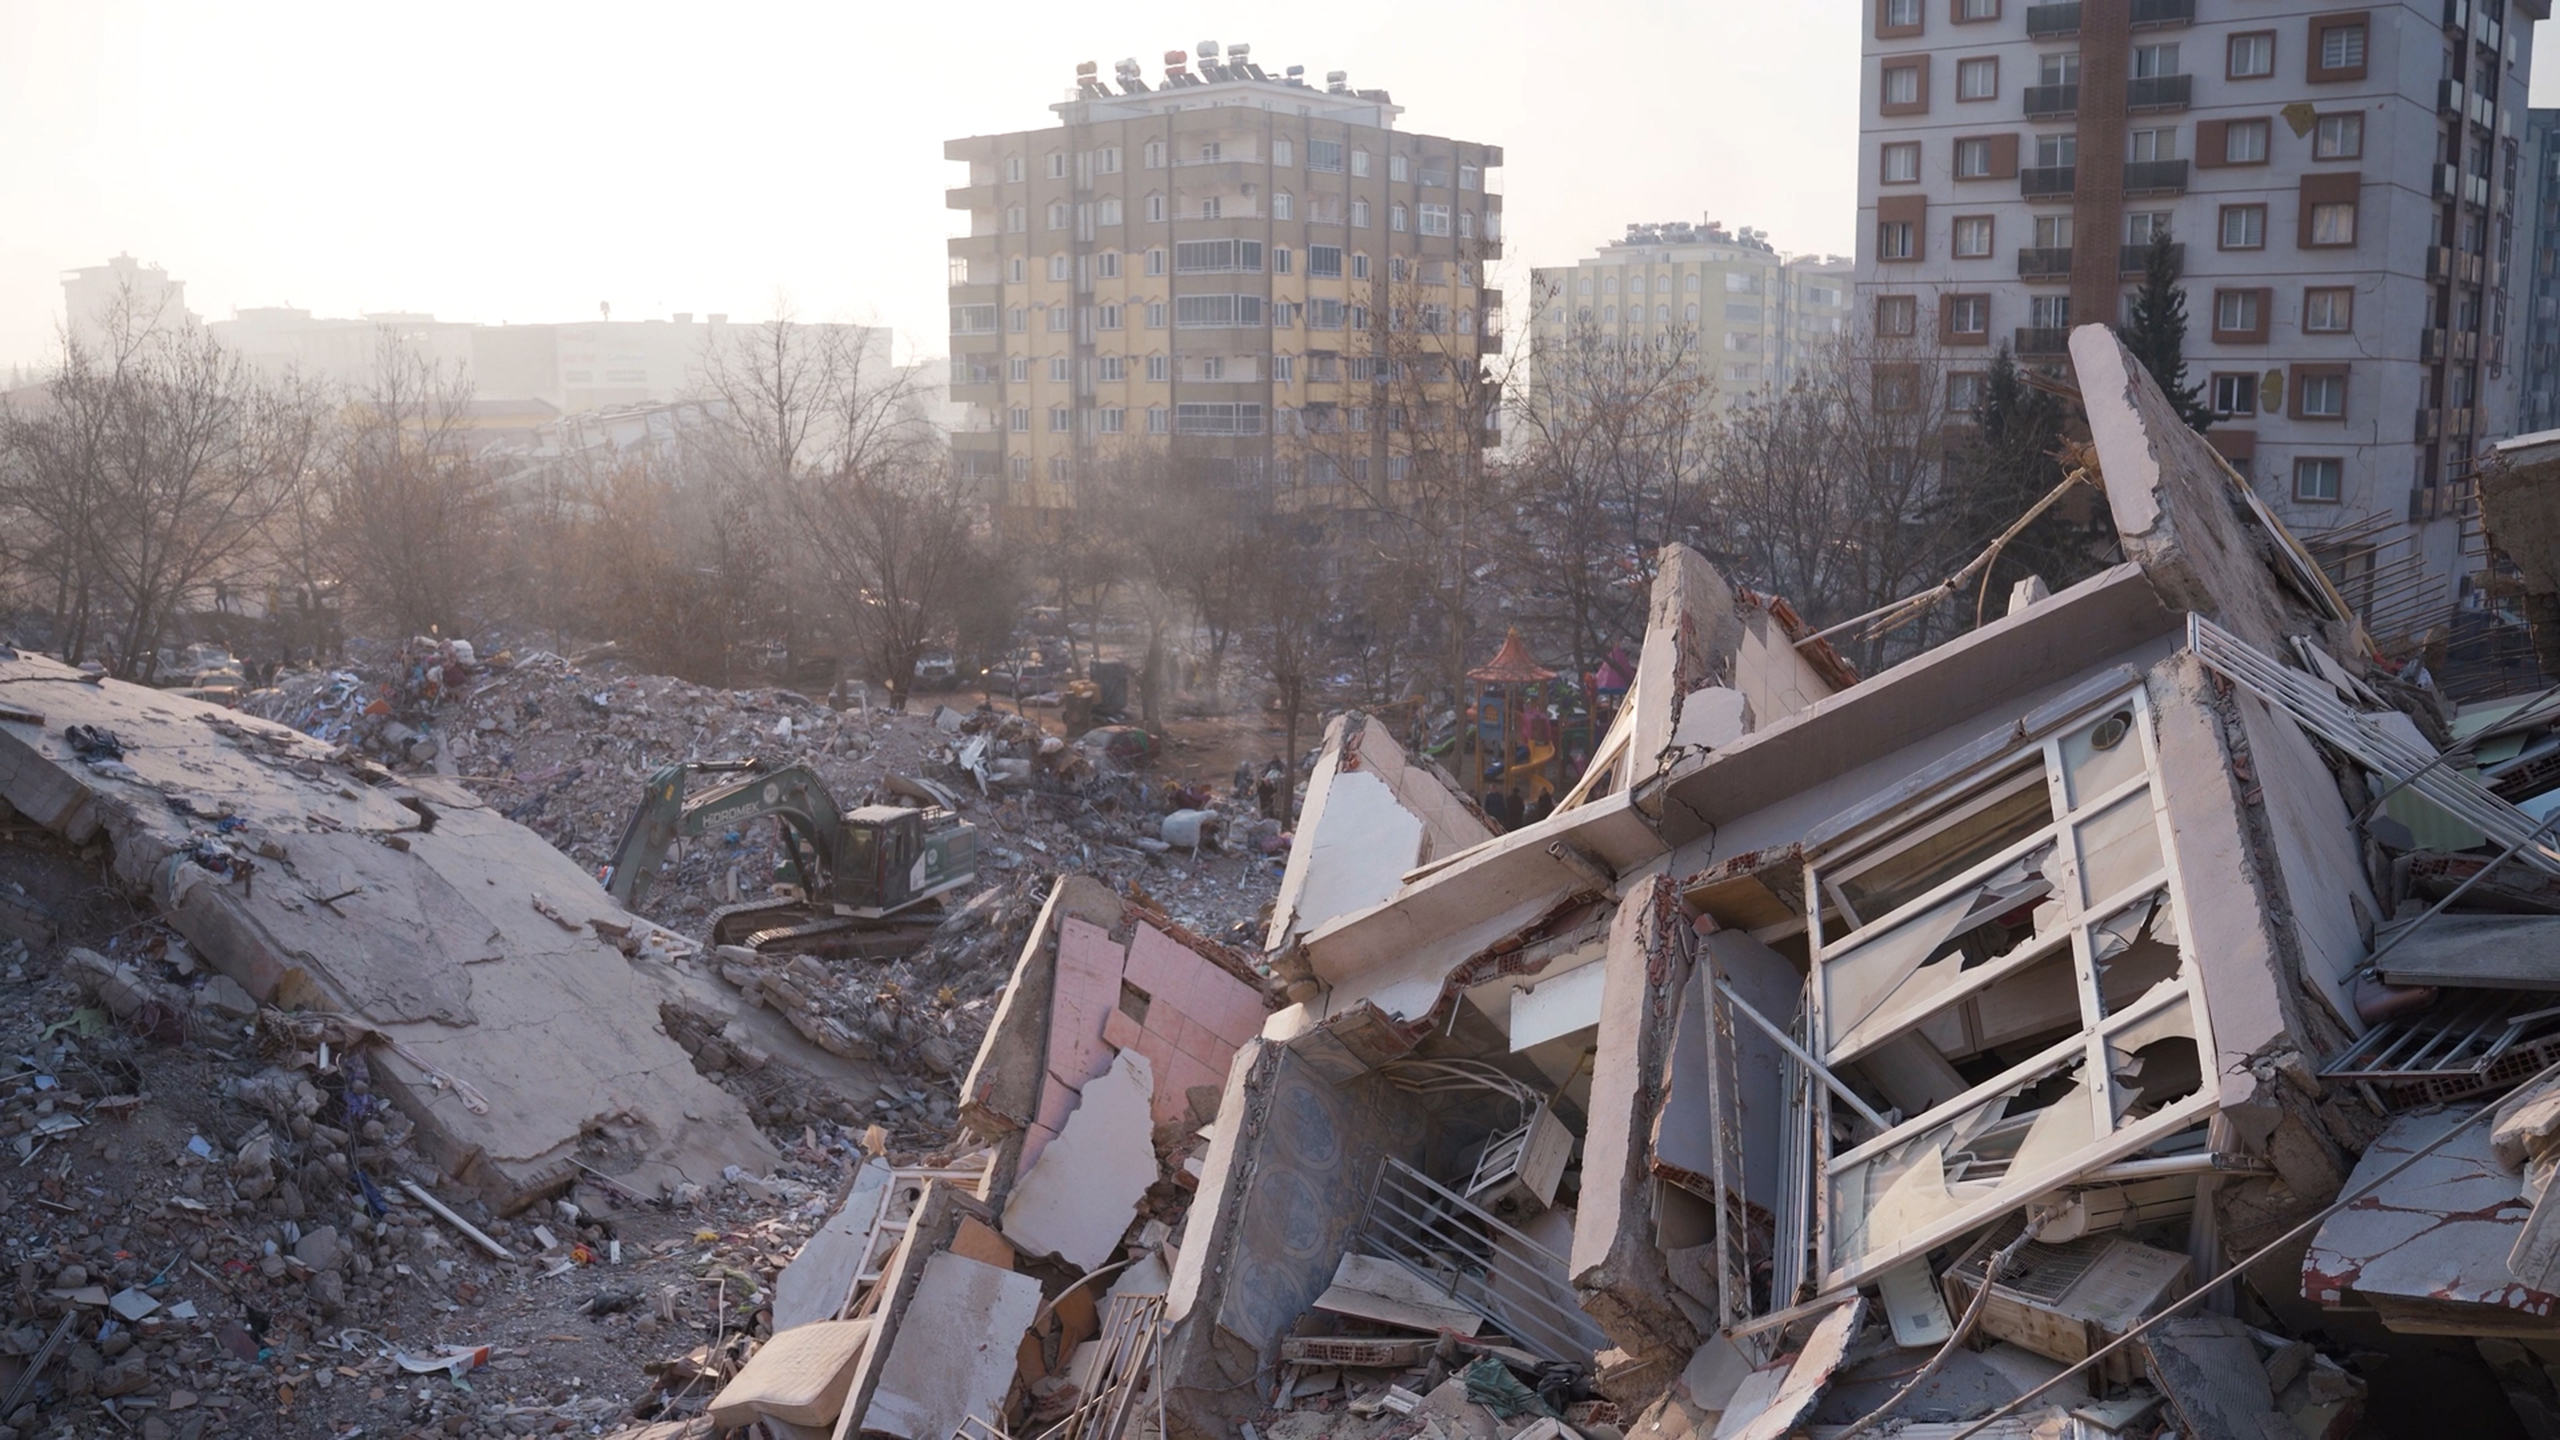 Destroyed Buildings in the Aftermath of the Earthquake in February 2023 in Turkey - Video Still